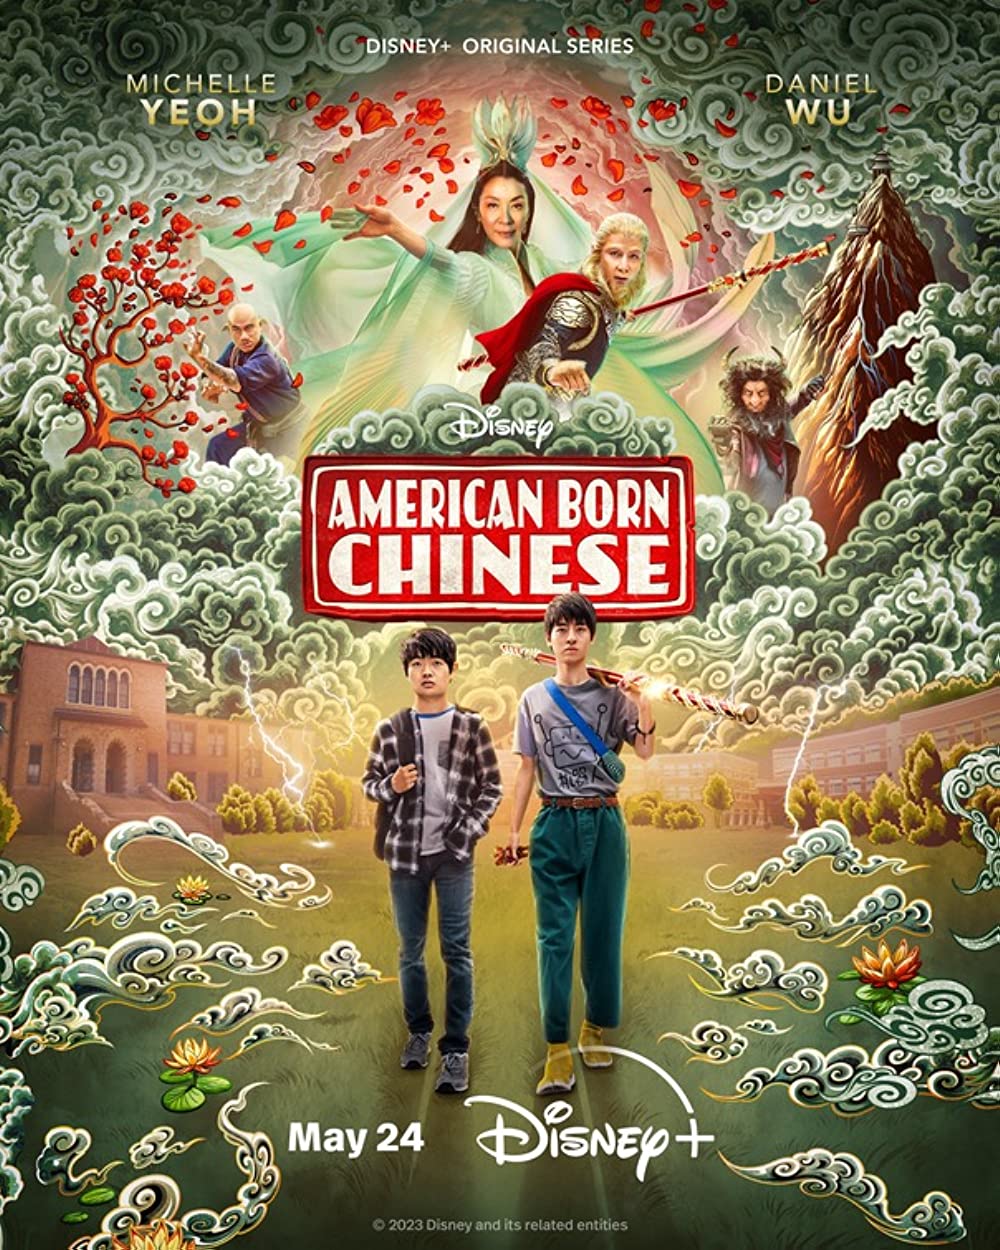 Series poster for "American Born Chinese"